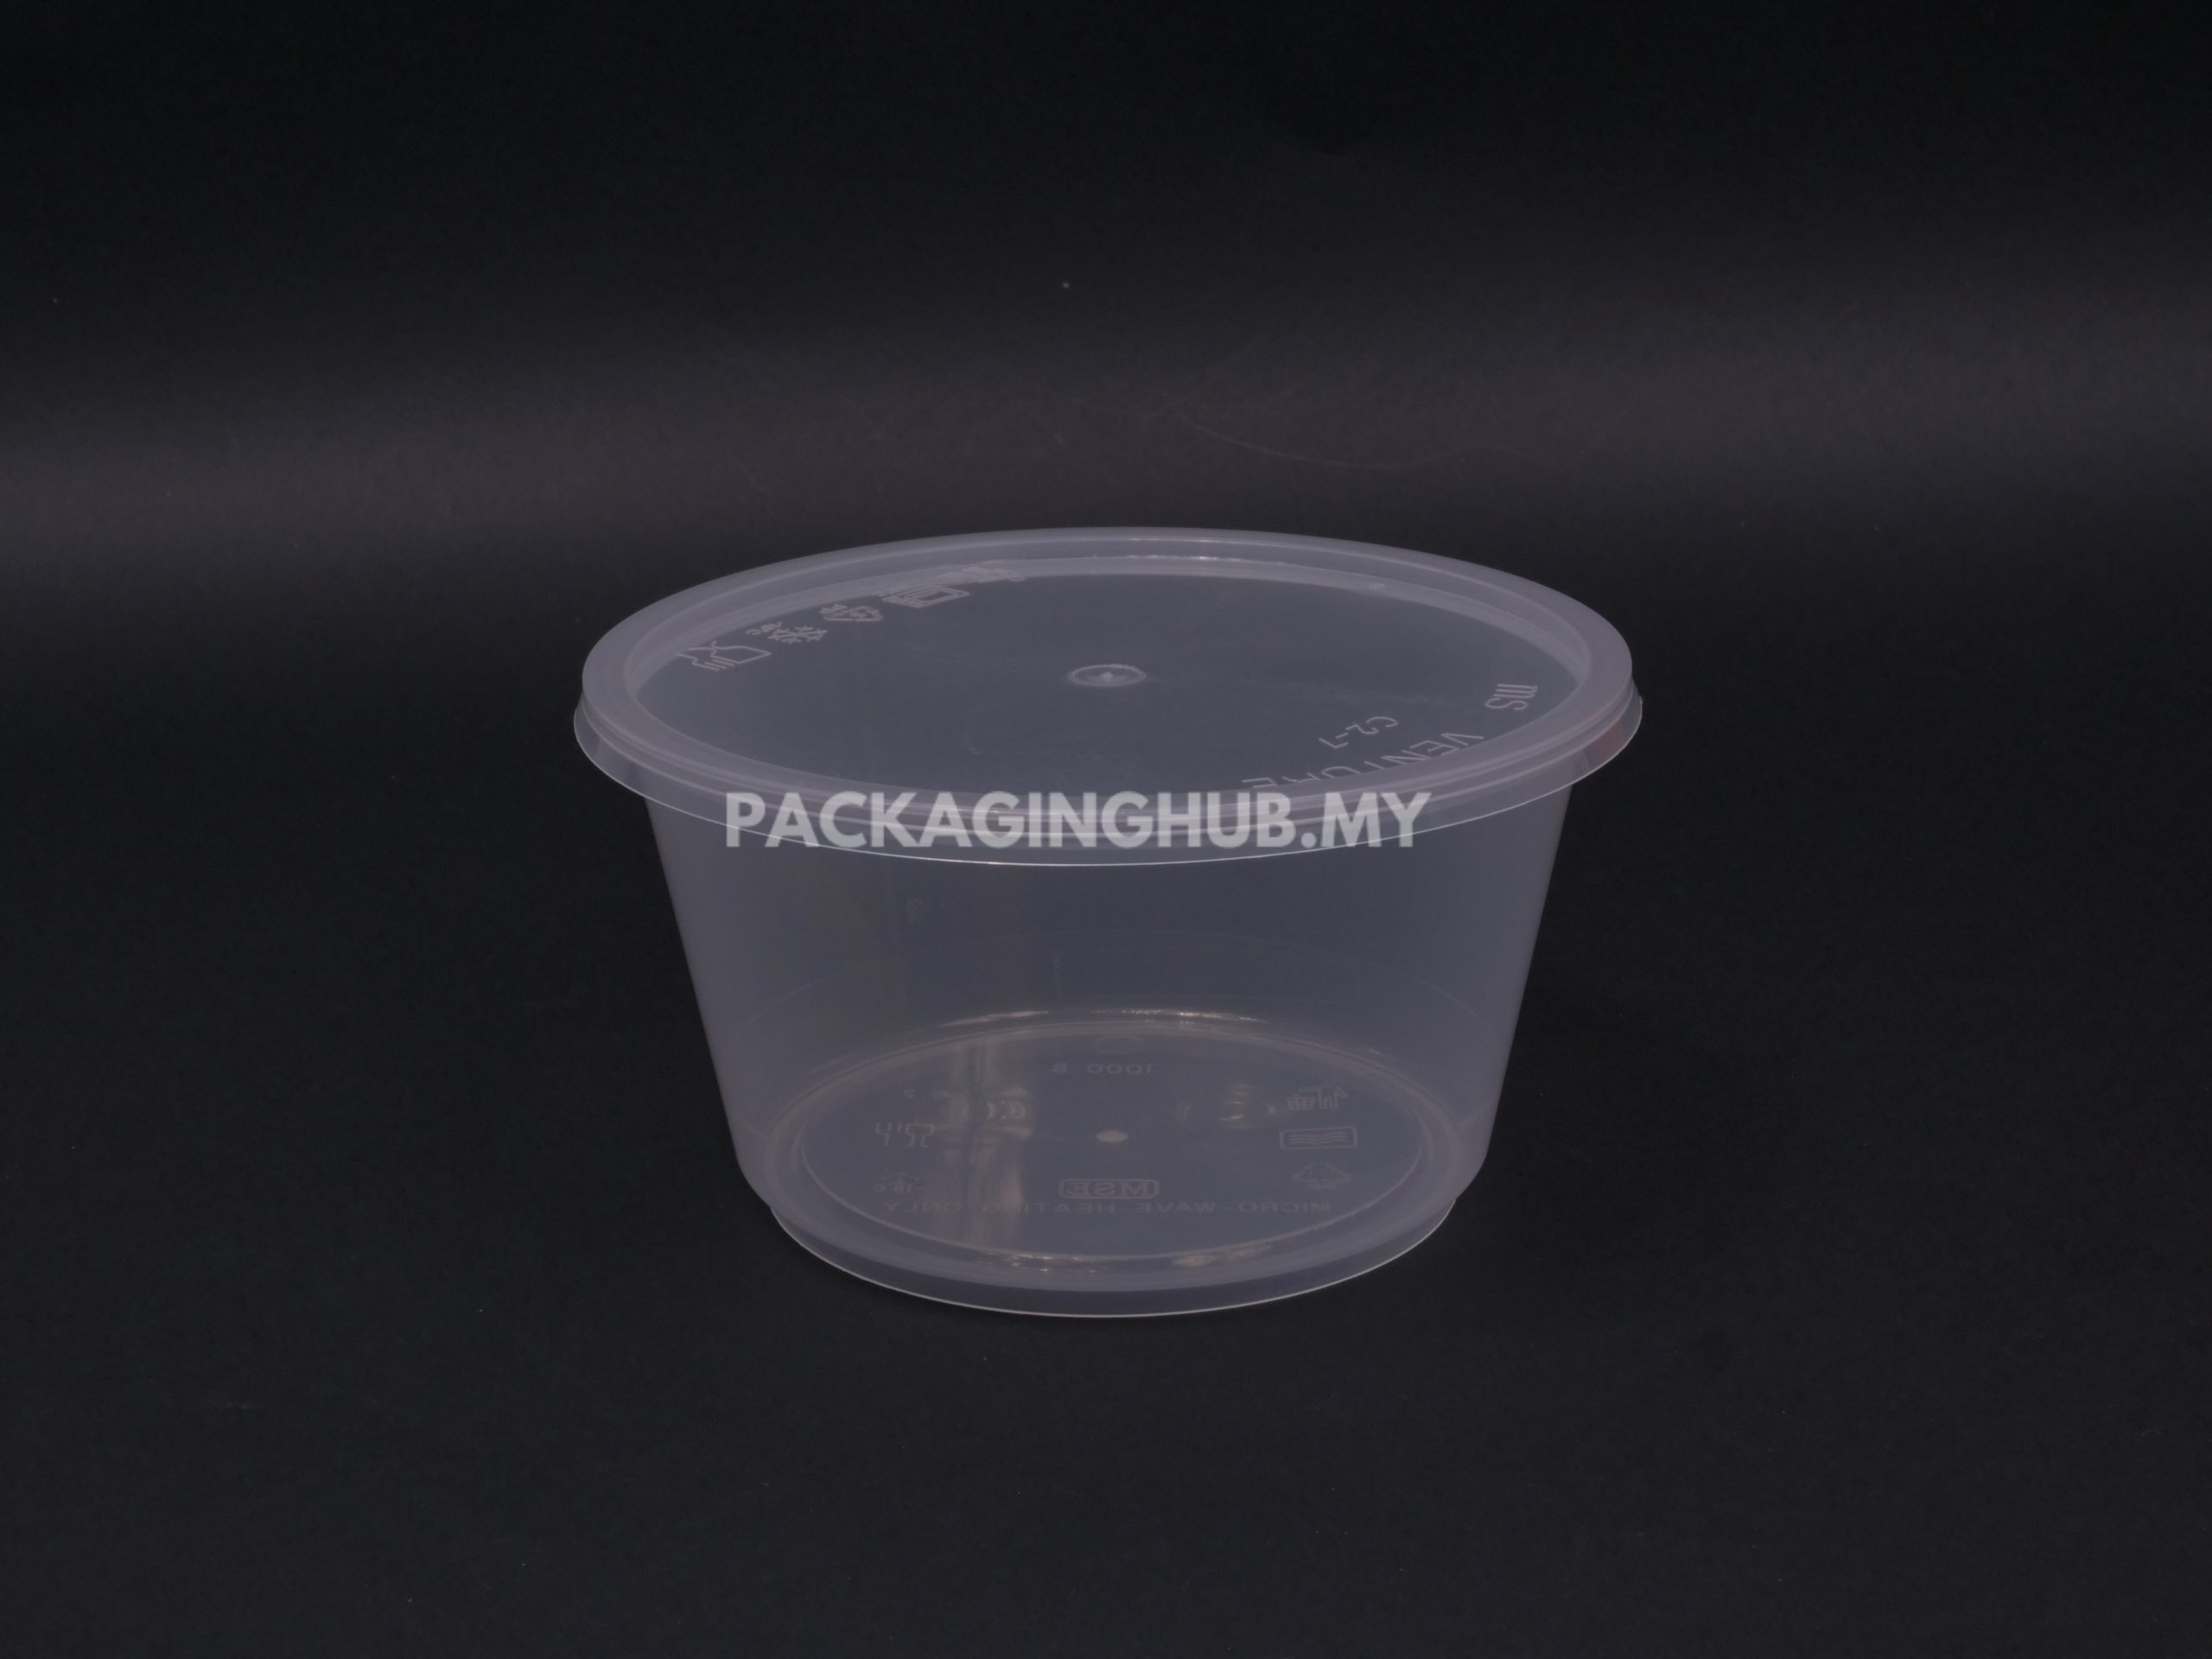 https://packaginghub.my/wp-content/uploads/2021/08/MSE-1000B-scaled.jpg